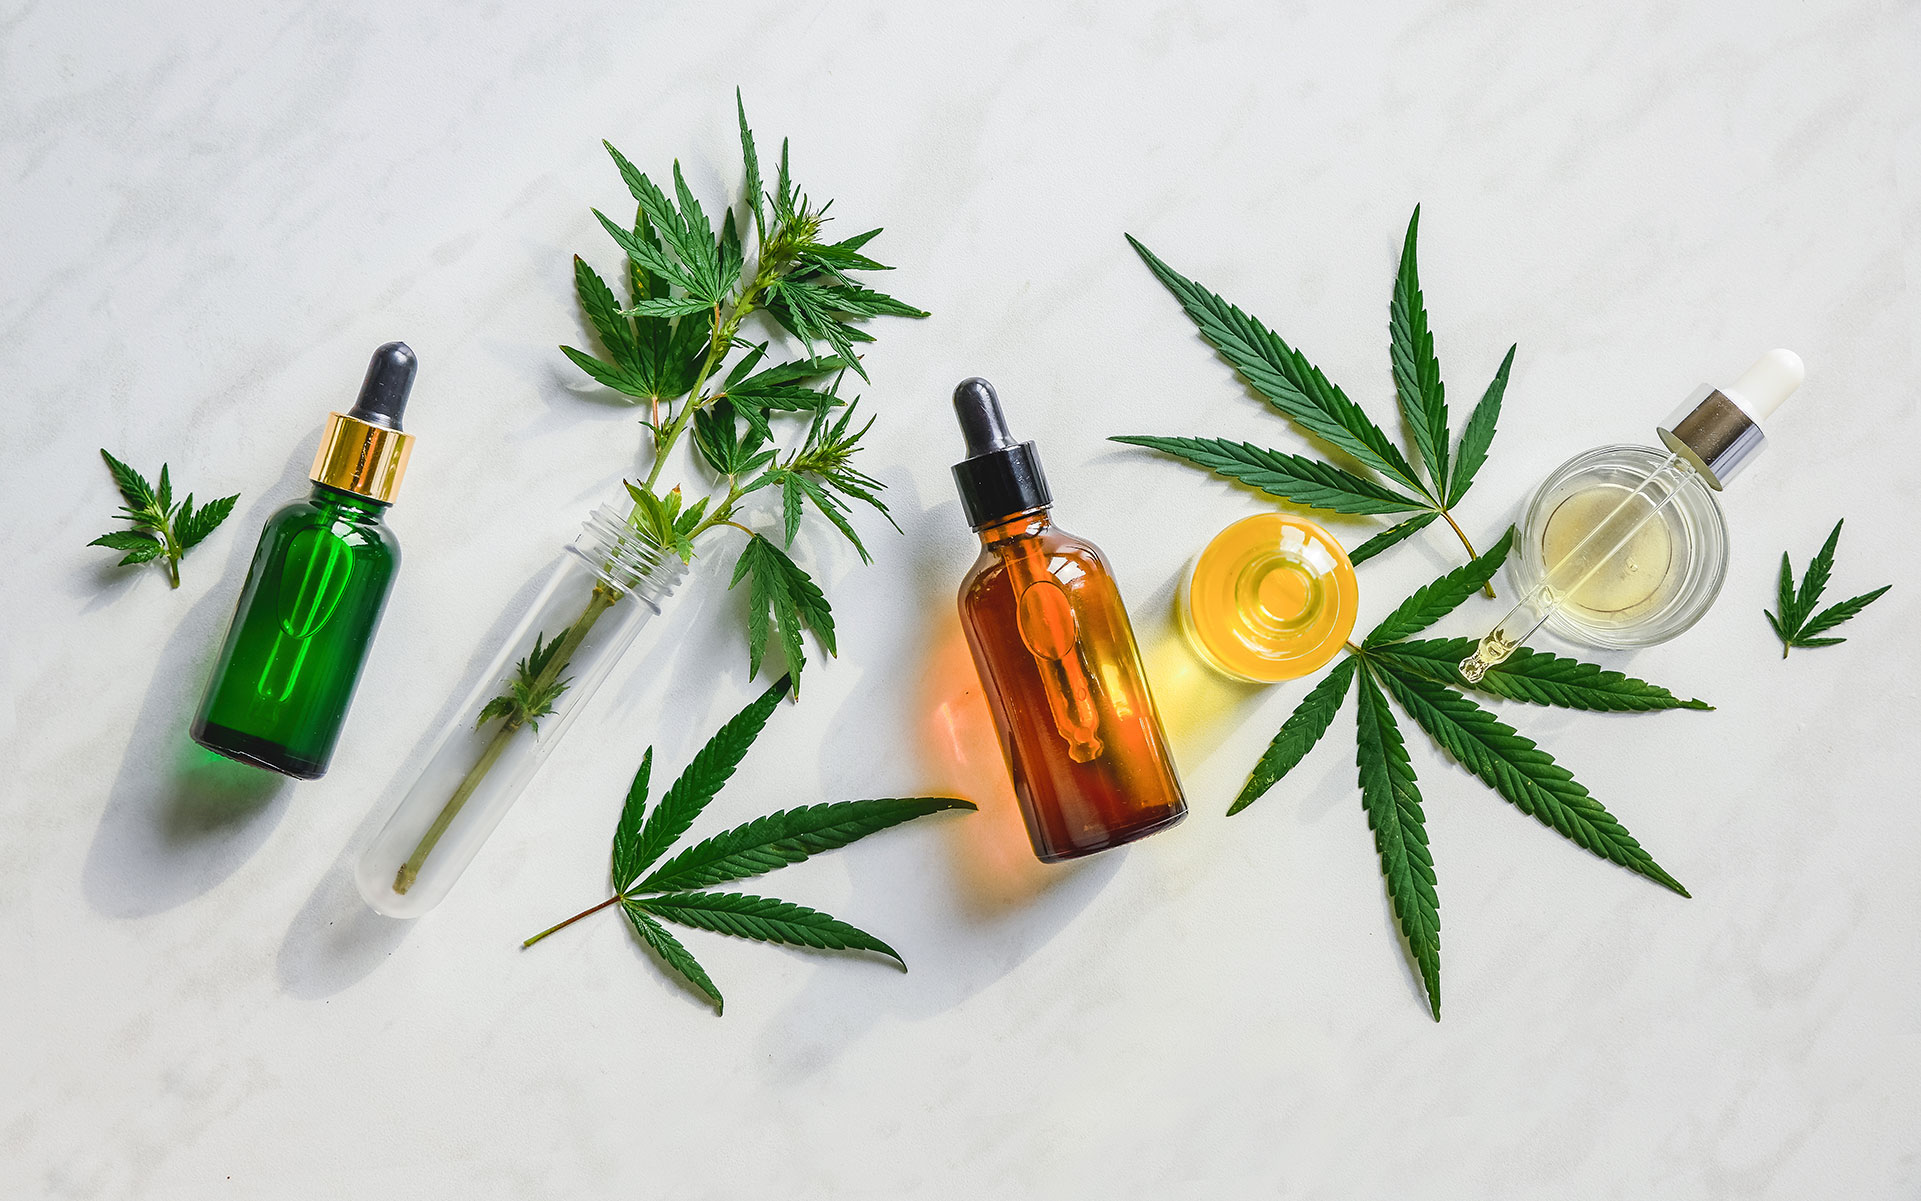 Cbd Oil Where To Buy The Best For Pain - Cbd|Oil|Cannabidiol|Products|View|Abstract|Effects|Hemp|Cannabis|Product|Thc|Pain|People|Health|Body|Plant|Cannabinoids|Medications|Oils|Drug|Benefits|System|Study|Marijuana|Anxiety|Side|Research|Effect|Liver|Quality|Treatment|Studies|Epilepsy|Symptoms|Gummies|Compounds|Dose|Time|Inflammation|Bottle|Cbd Oil|View Abstract|Side Effects|Cbd Products|Endocannabinoid System|Multiple Sclerosis|Cbd Oils|Cbd Gummies|Cannabis Plant|Hemp Oil|Cbd Product|Hemp Plant|United States|Cytochrome P450|Many People|Chronic Pain|Nuleaf Naturals|Royal Cbd|Full-Spectrum Cbd Oil|Drug Administration|Cbd Oil Products|Medical Marijuana|Drug Test|Heavy Metals|Clinical Trial|Clinical Trials|Cbd Oil Side|Rating Highlights|Wide Variety|Animal Studies